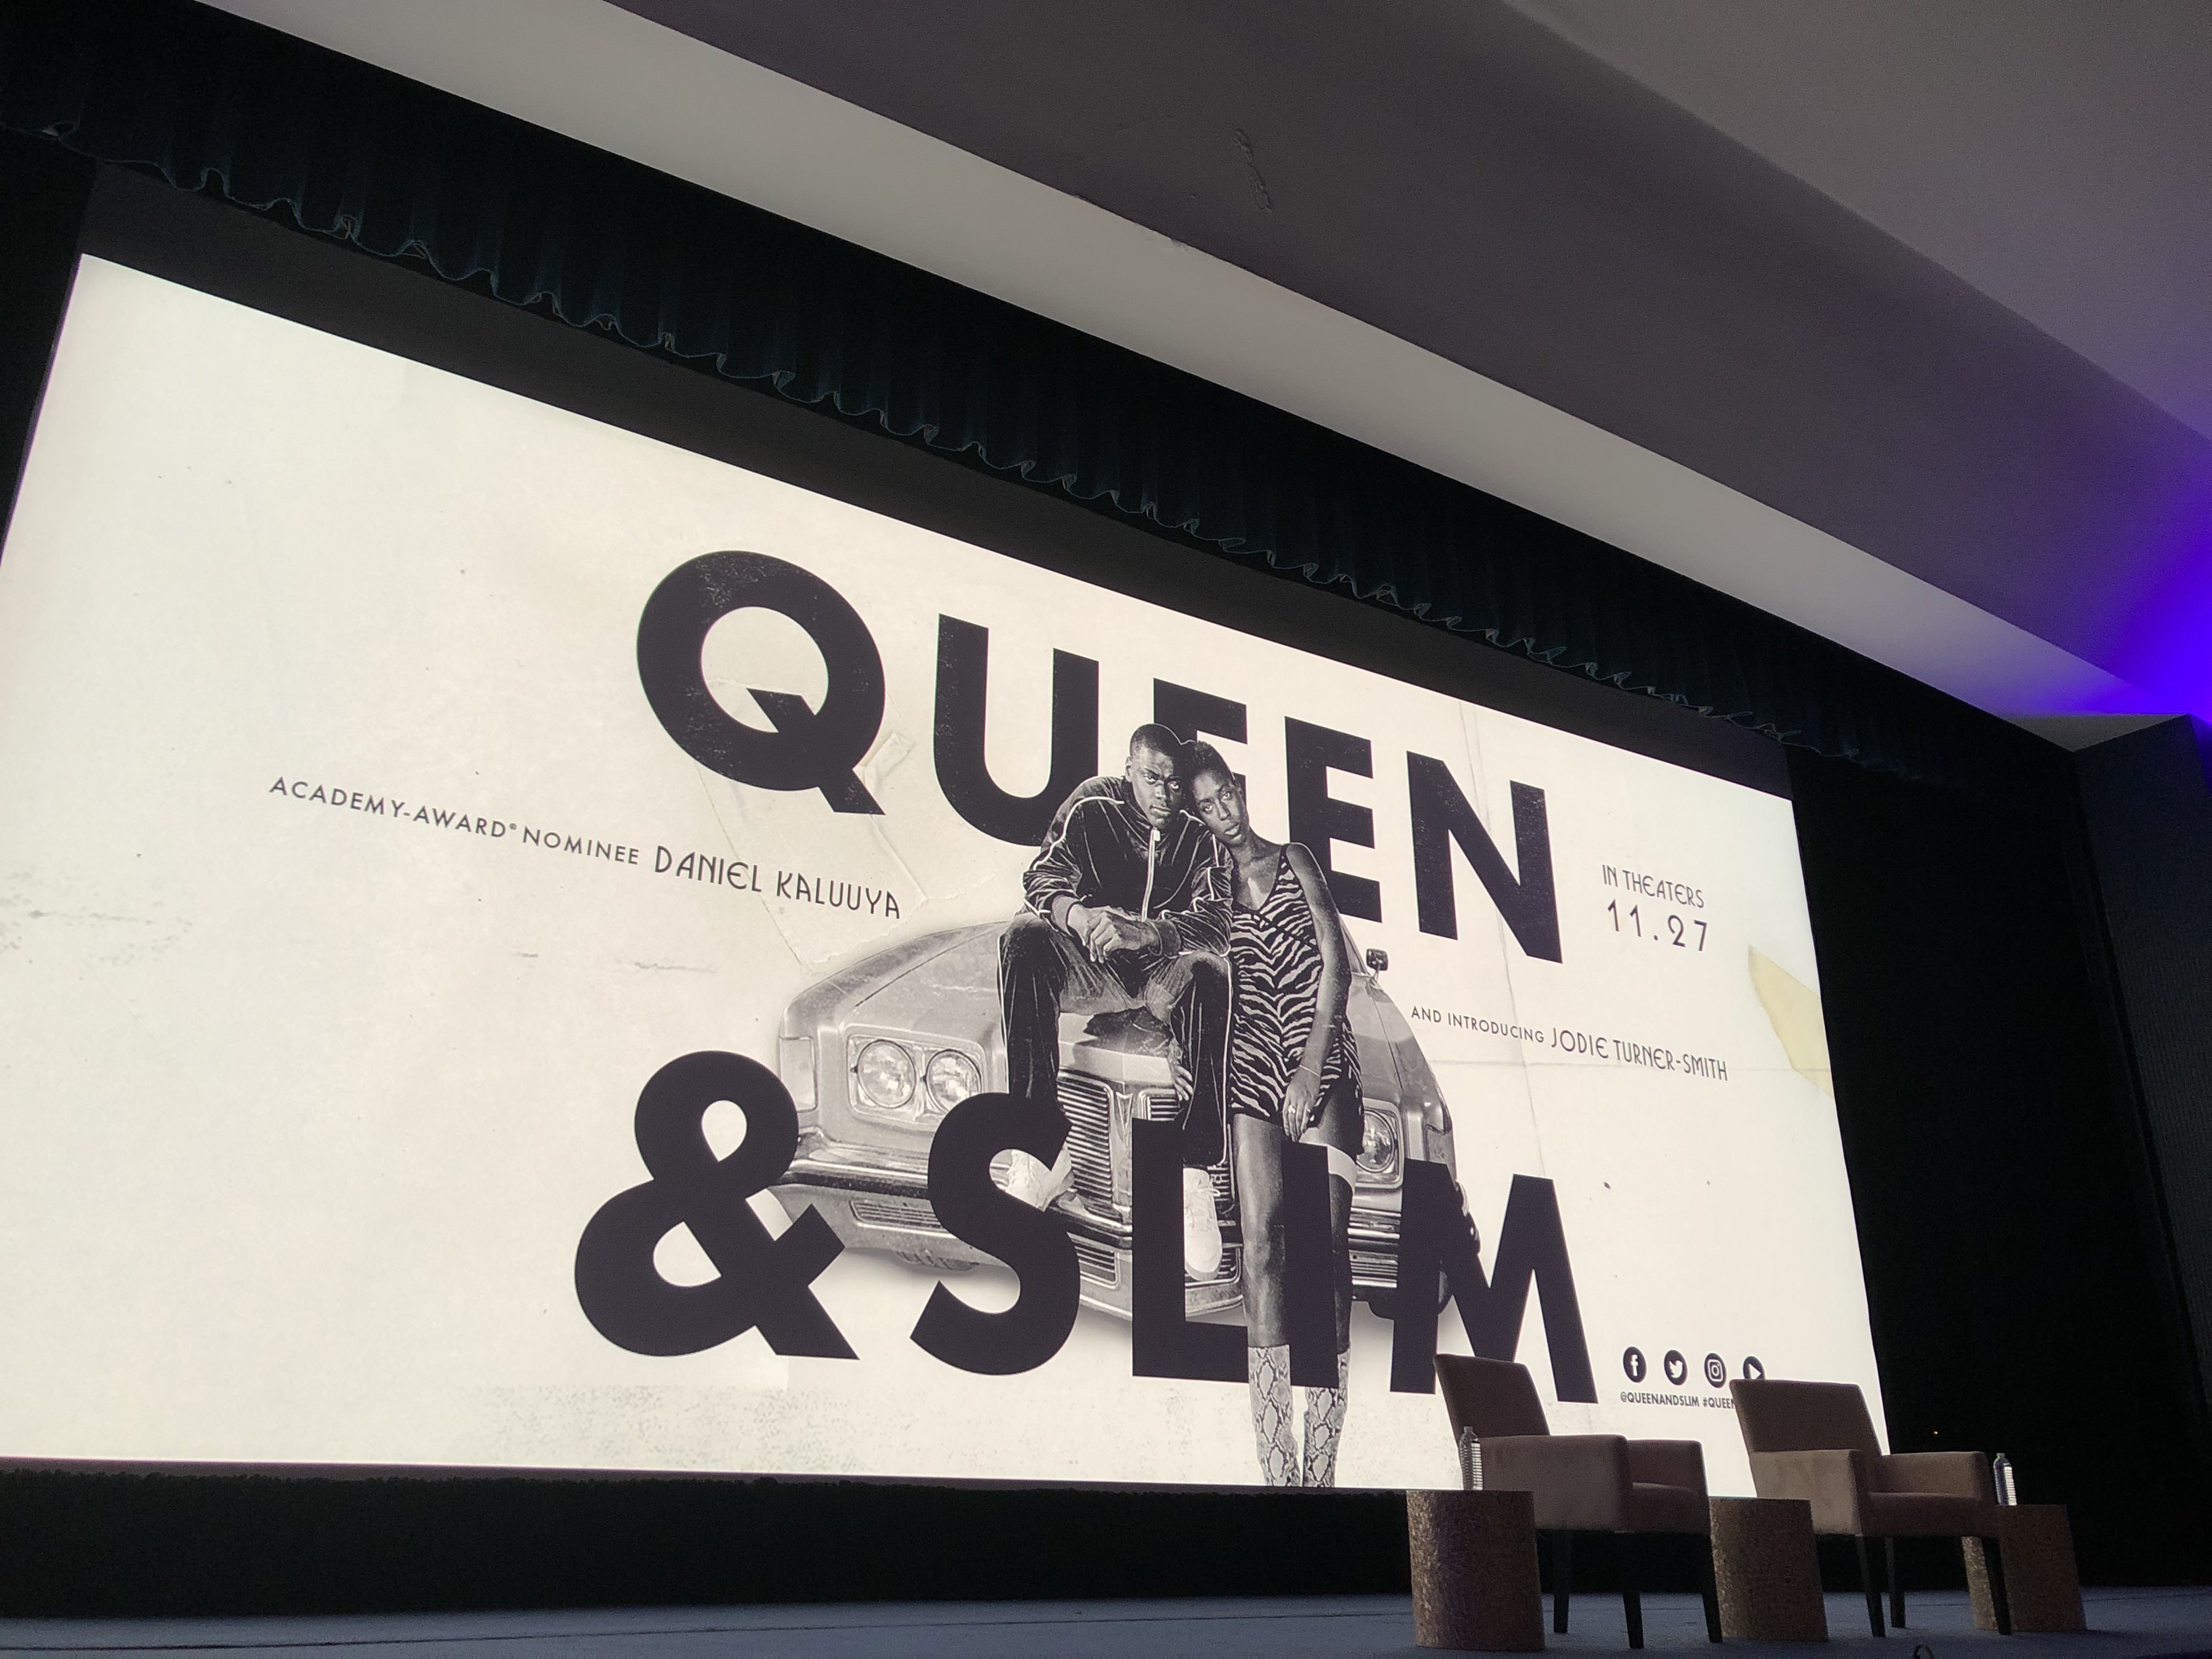 Review: Love & Legacy: Queen & Slim, An Instant Classic?